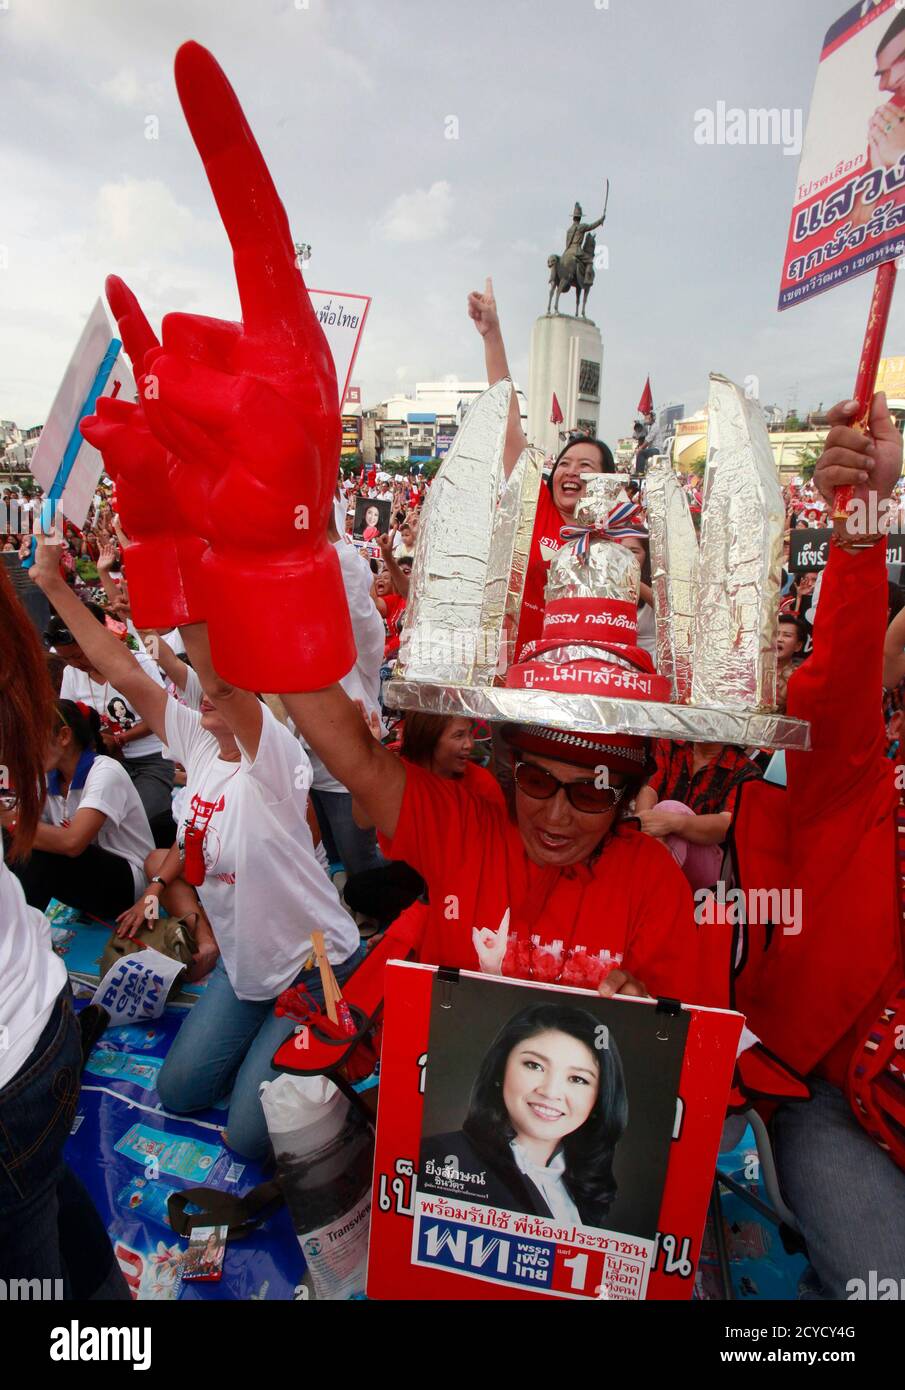 A supporter of the country's biggest opposition Puea Thai Party holds a portrait of prime ministerial candidate Yingluck Shinawatra, the sister of toppled former Thai premier Thaksin Shinawatra, during an election campaign in Bangkok June 18, 2011. Thais will go to the polls on July 3 for a general election.   REUTERS/Chaiwat Subprasom  (THAILAND - Tags: POLITICS ELECTIONS) Stock Photo